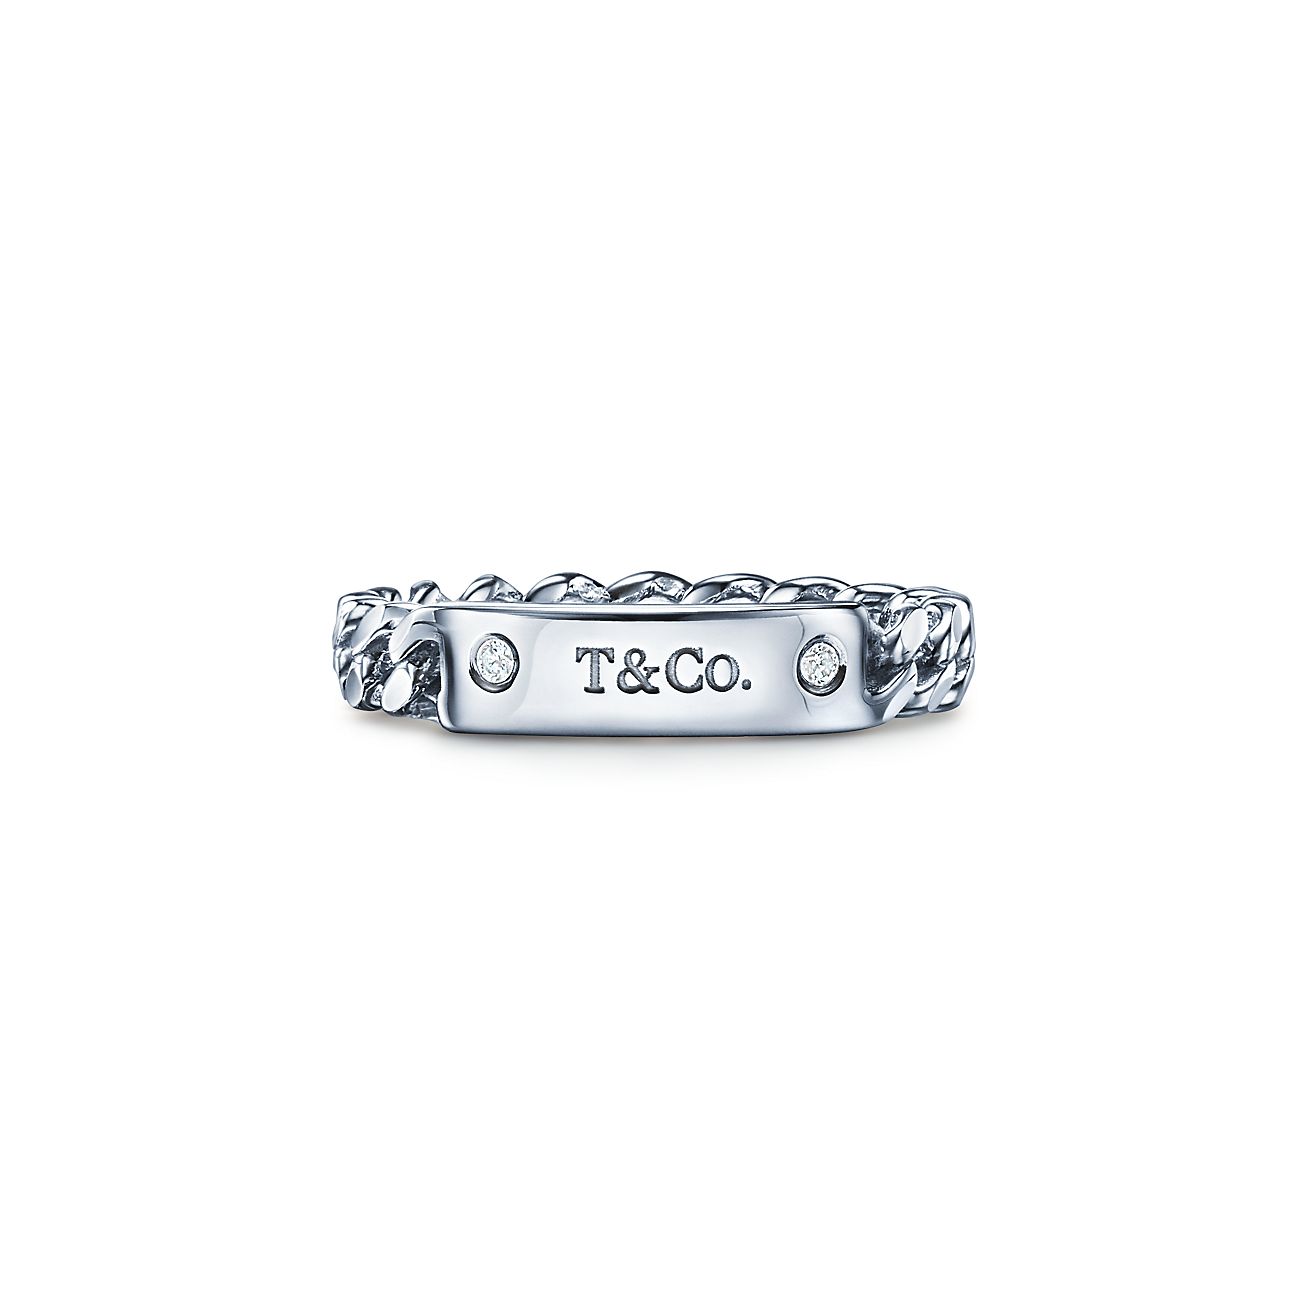 t & co ring